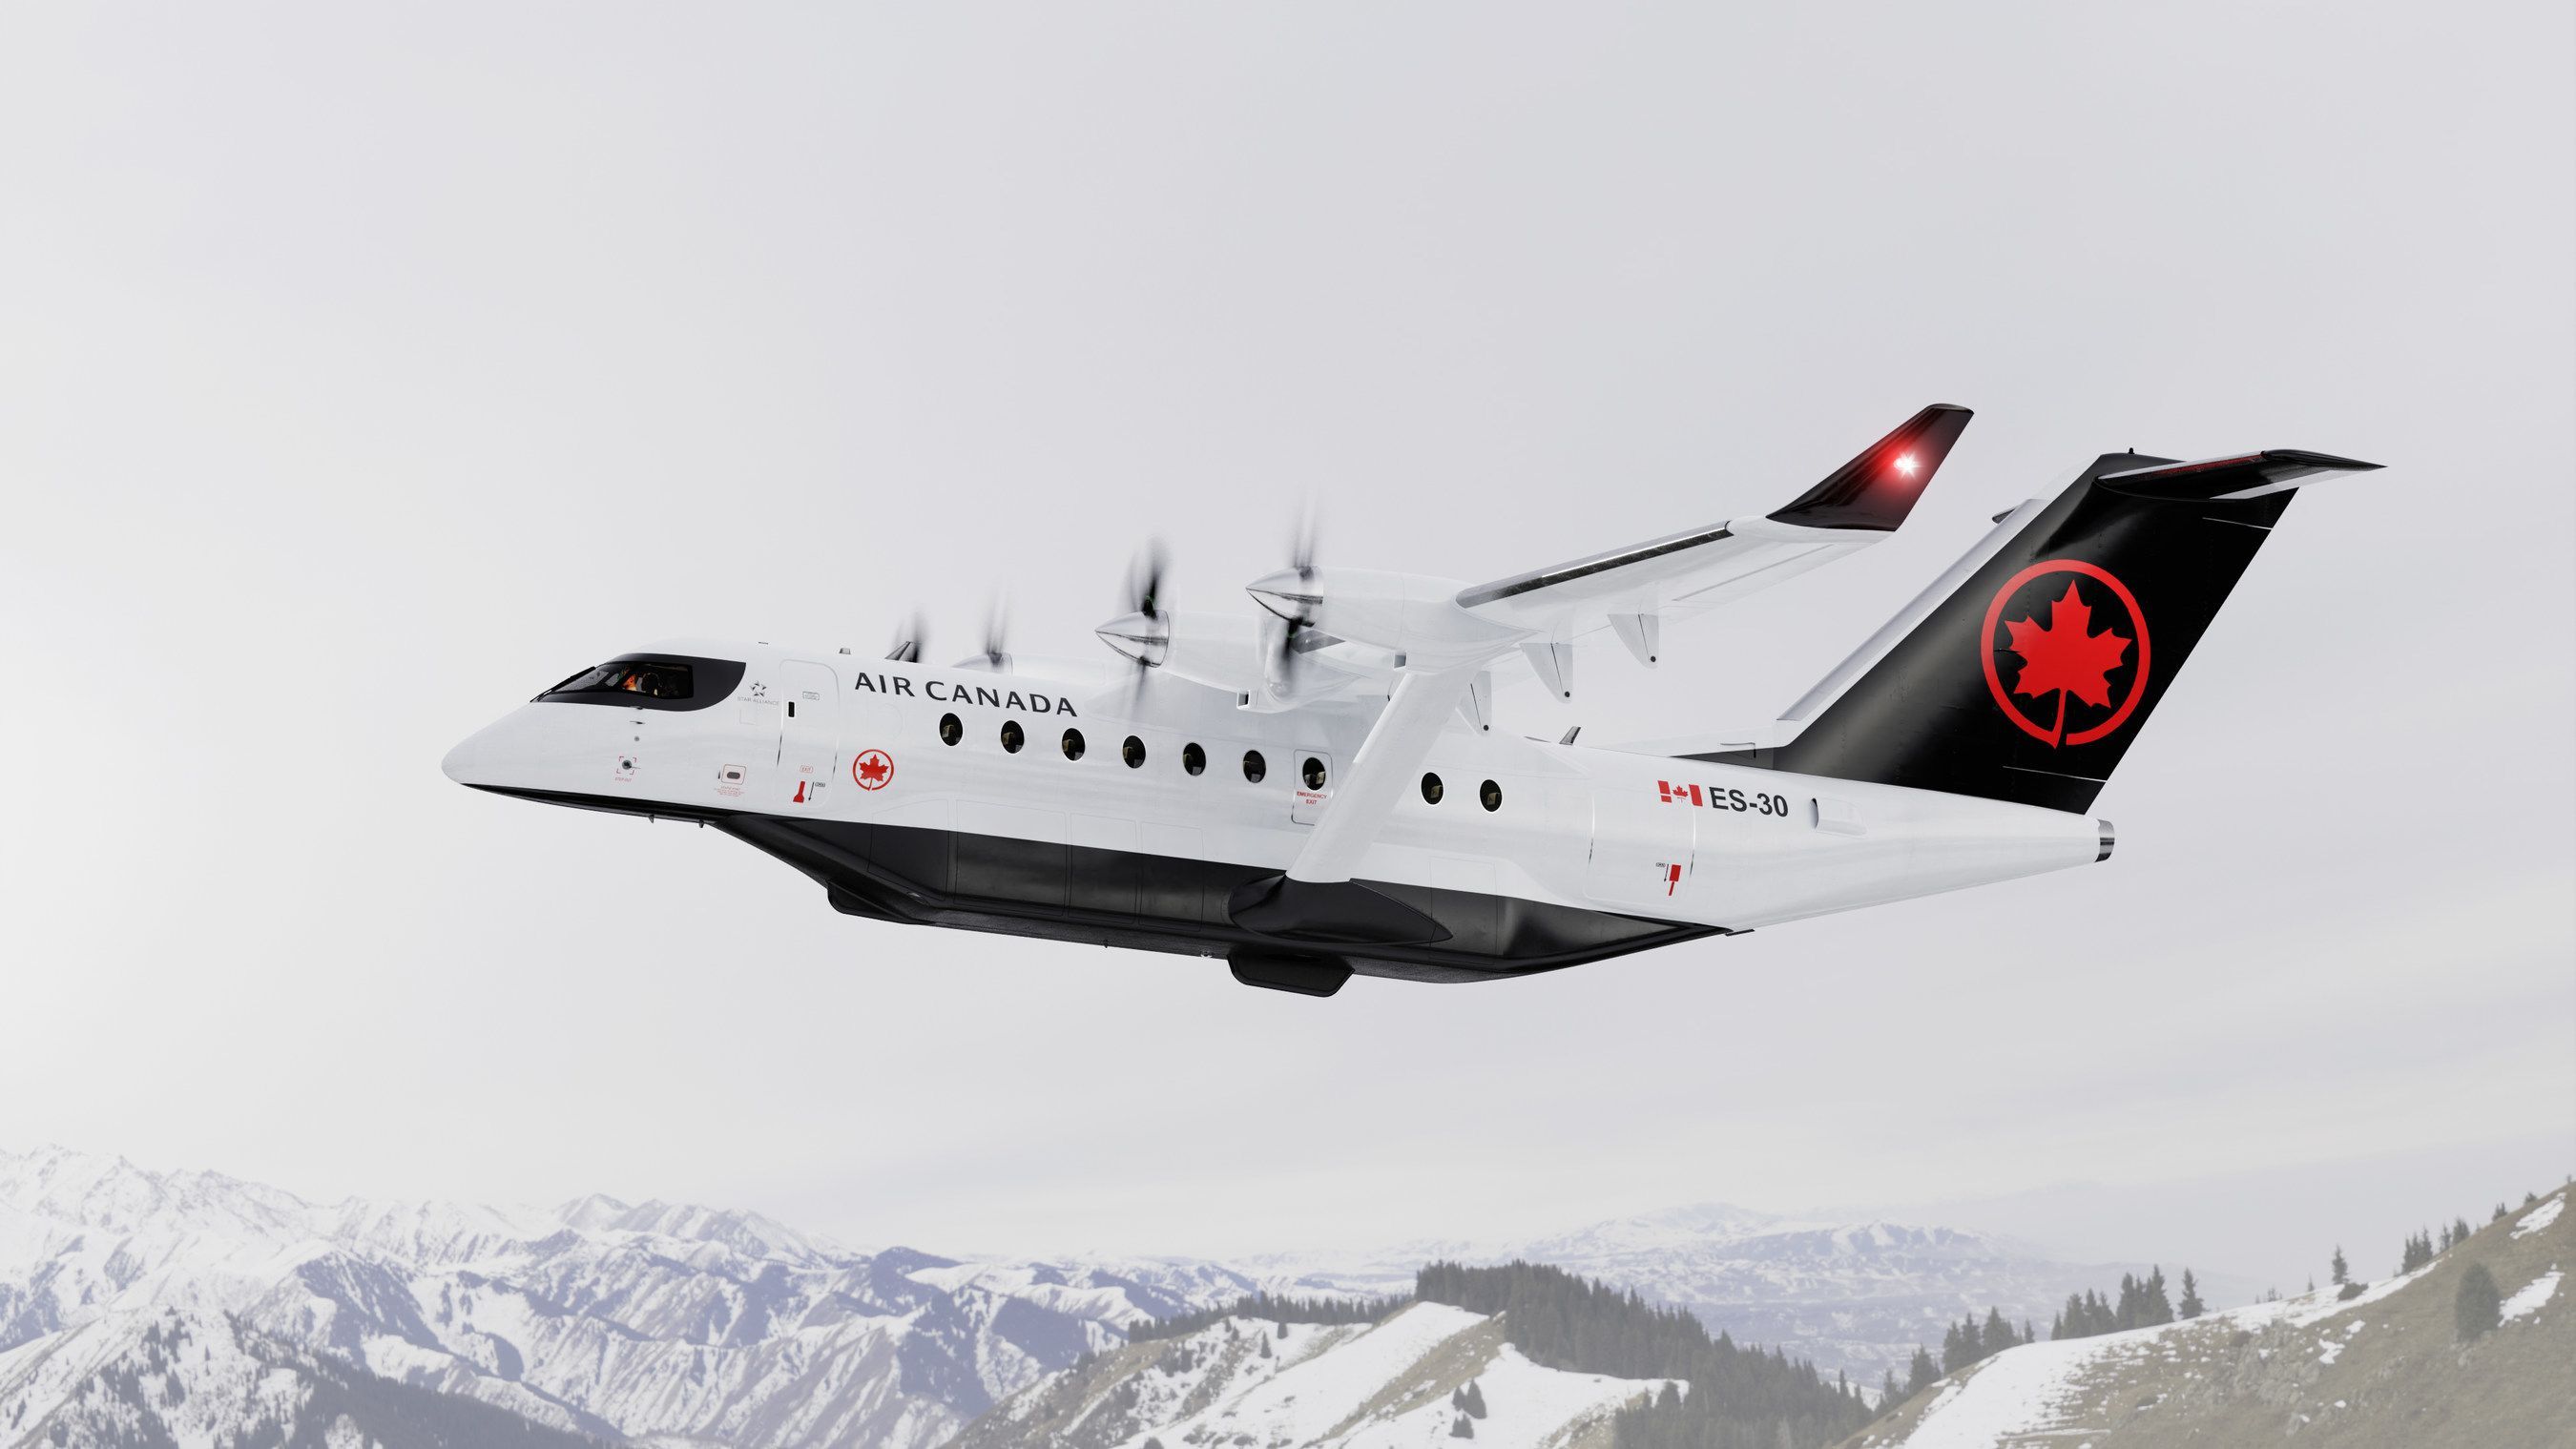 An electric aircraft with Air Canada livery.